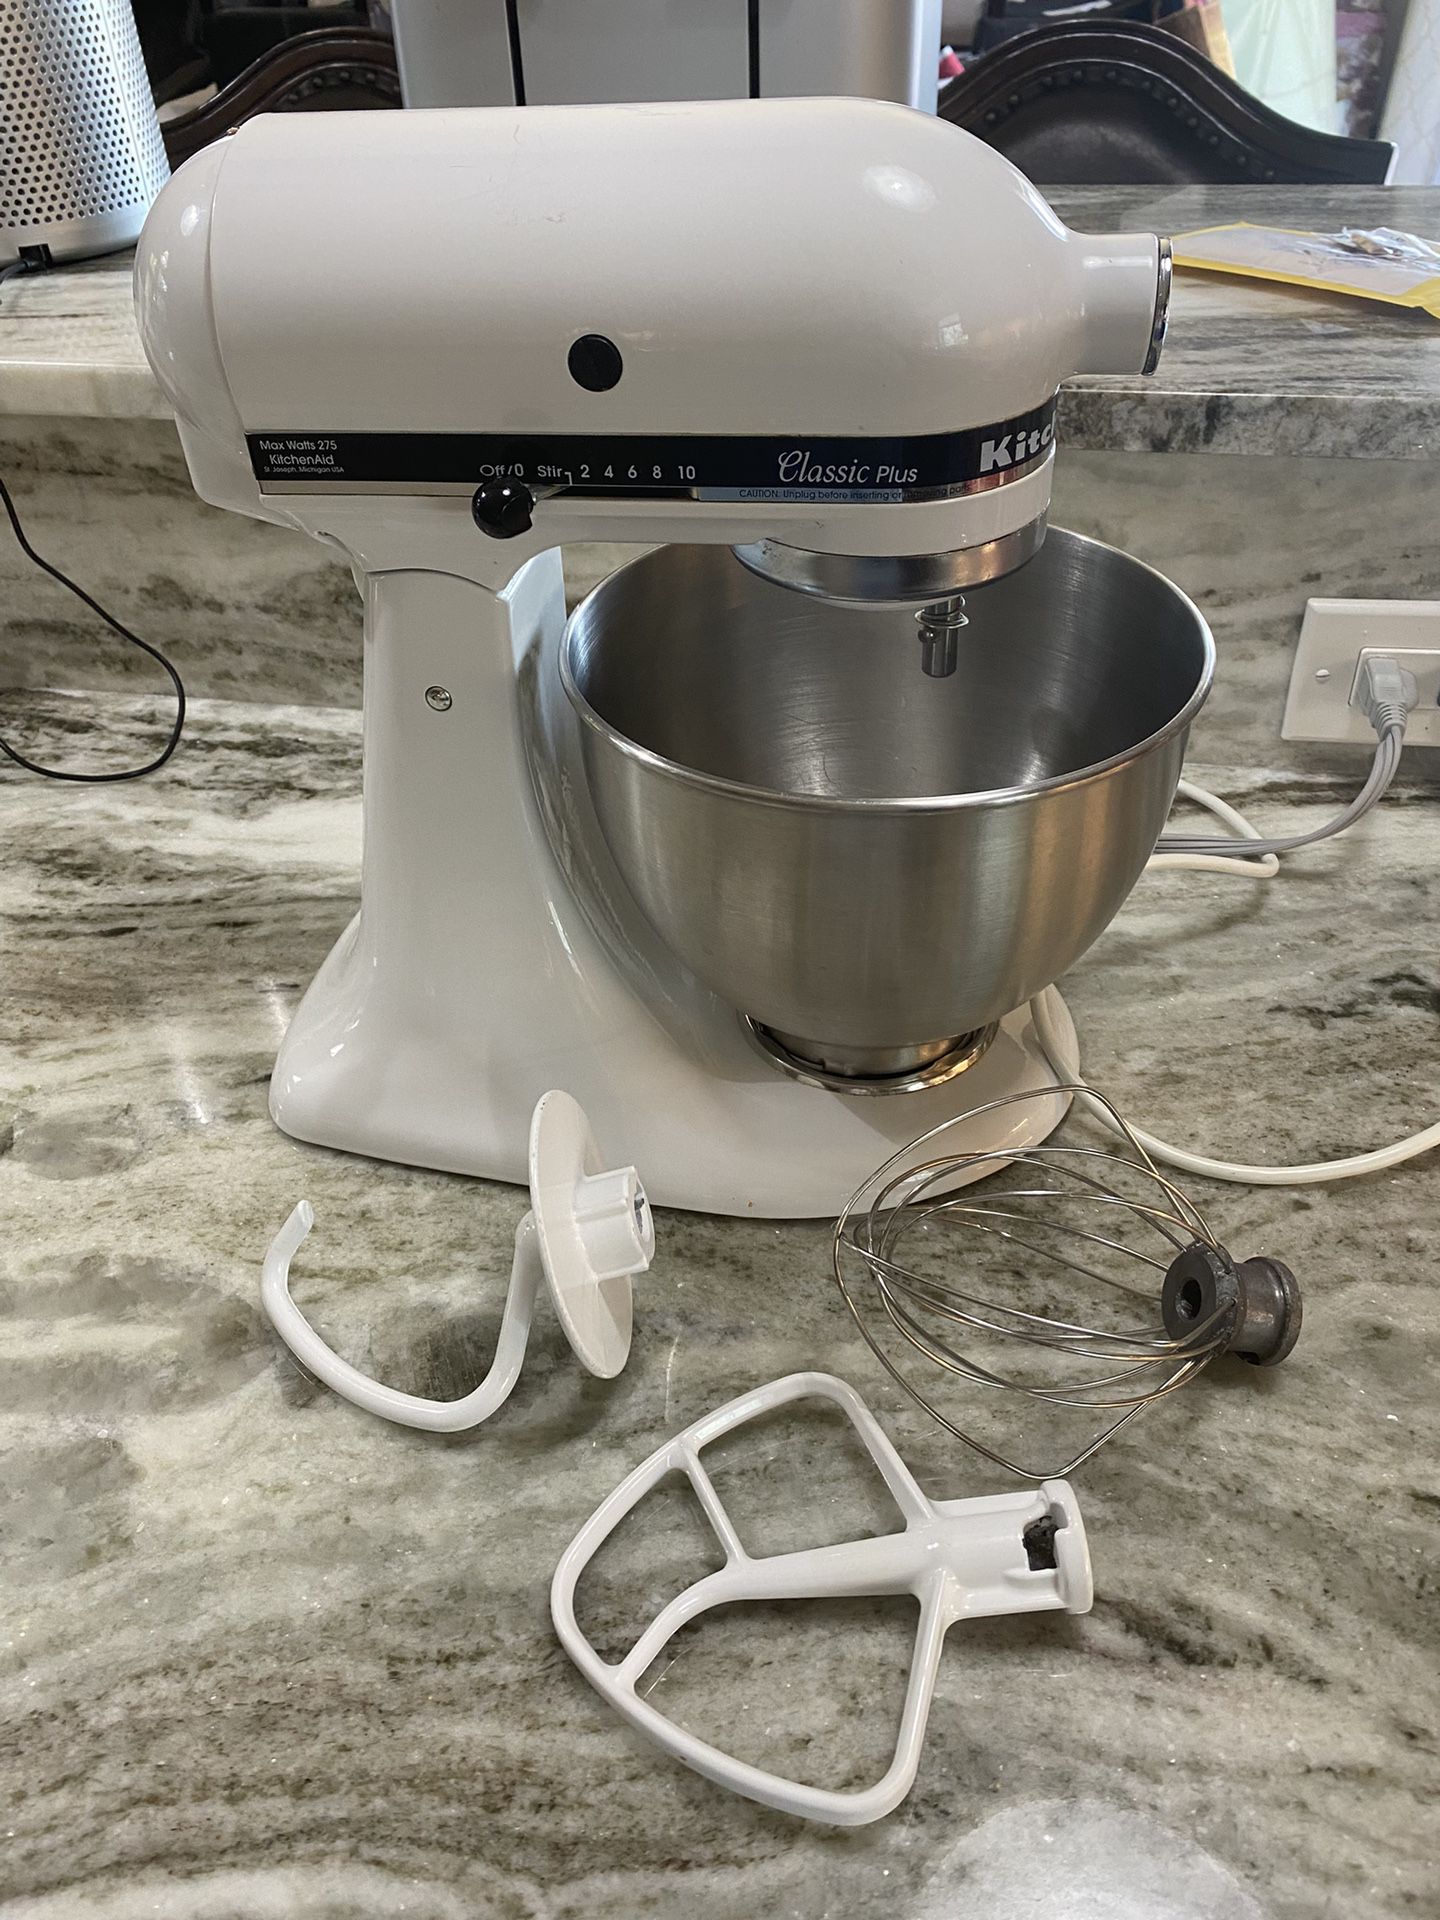 KitchenAid Classic Can Opener, Red for Sale in Dallas, TX - OfferUp